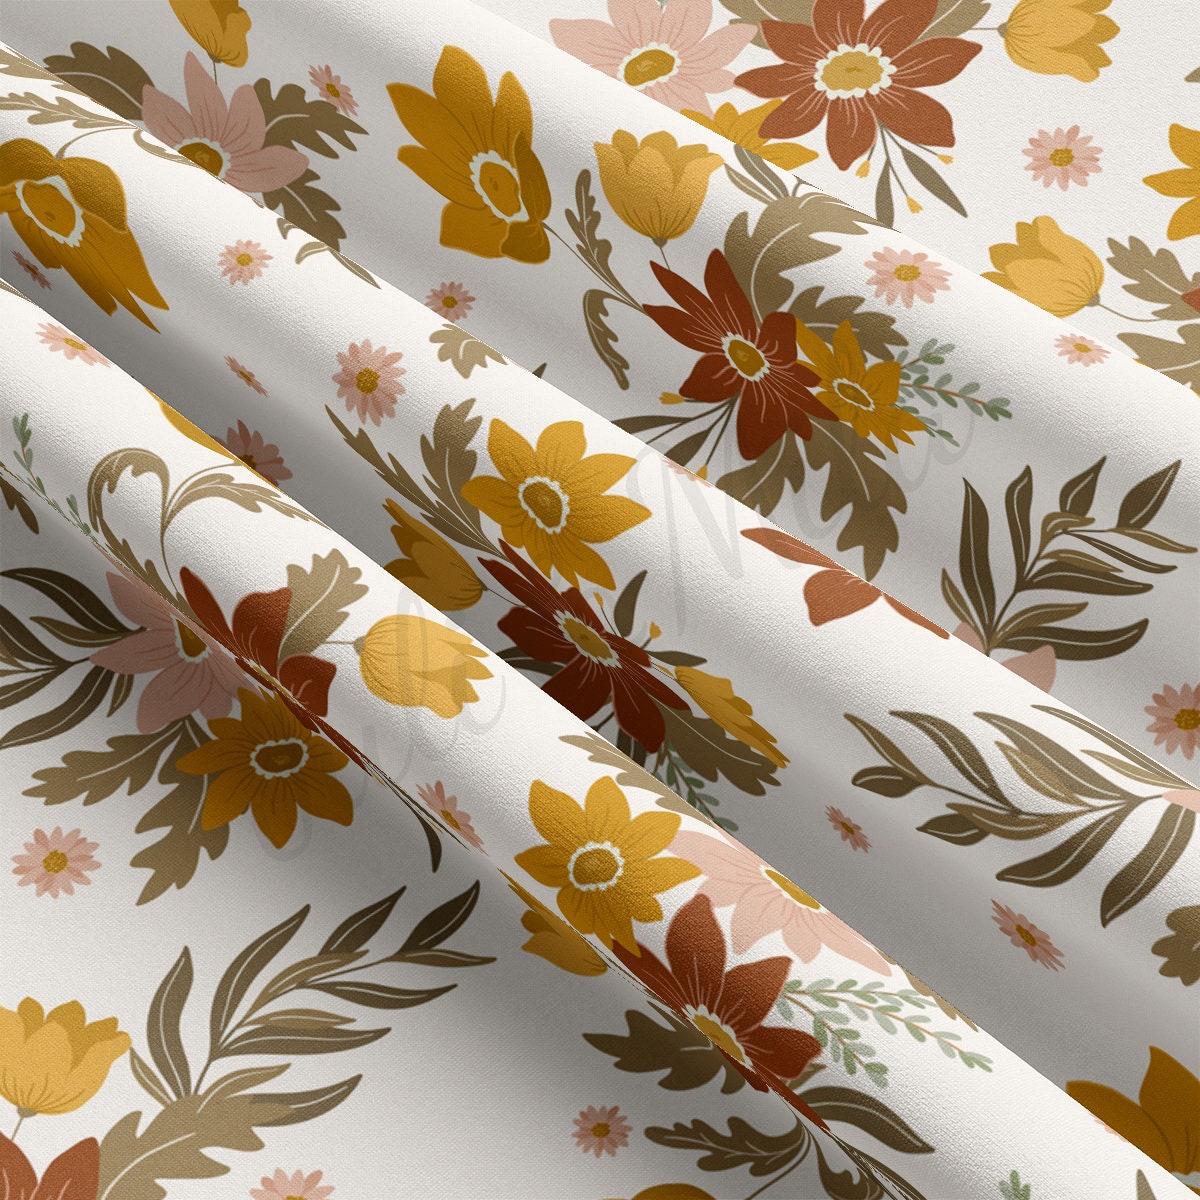 Floral DBP Fabric Double Brushed Polyester Fabric by the Yard DBP Jersey Stretchy Soft Polyester Stretch Fabric DBP2176